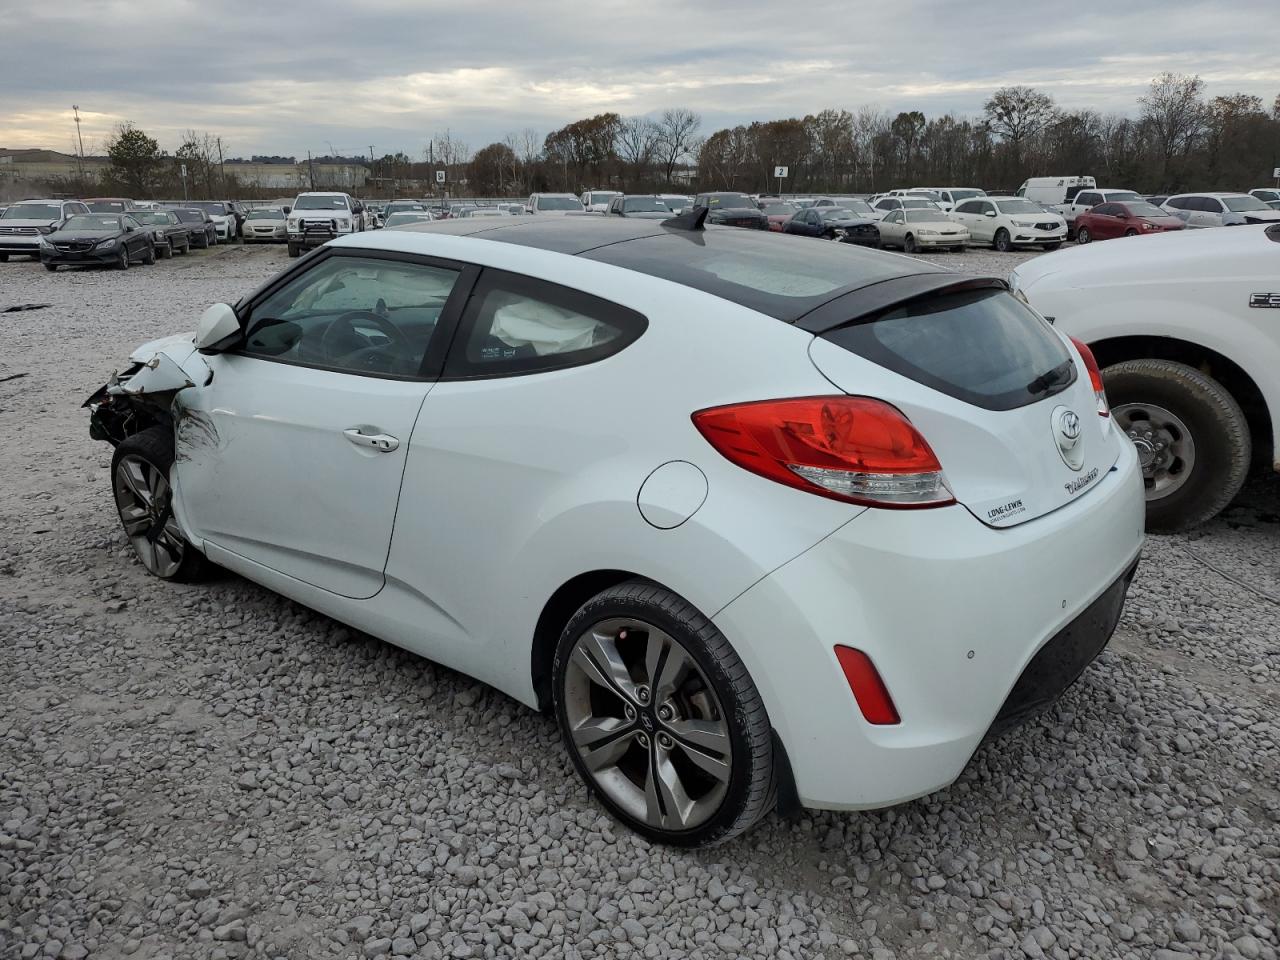 KMHTC6AD4CU****** Used and Repairable 2012 Hyundai Veloster in AL - Hueytown